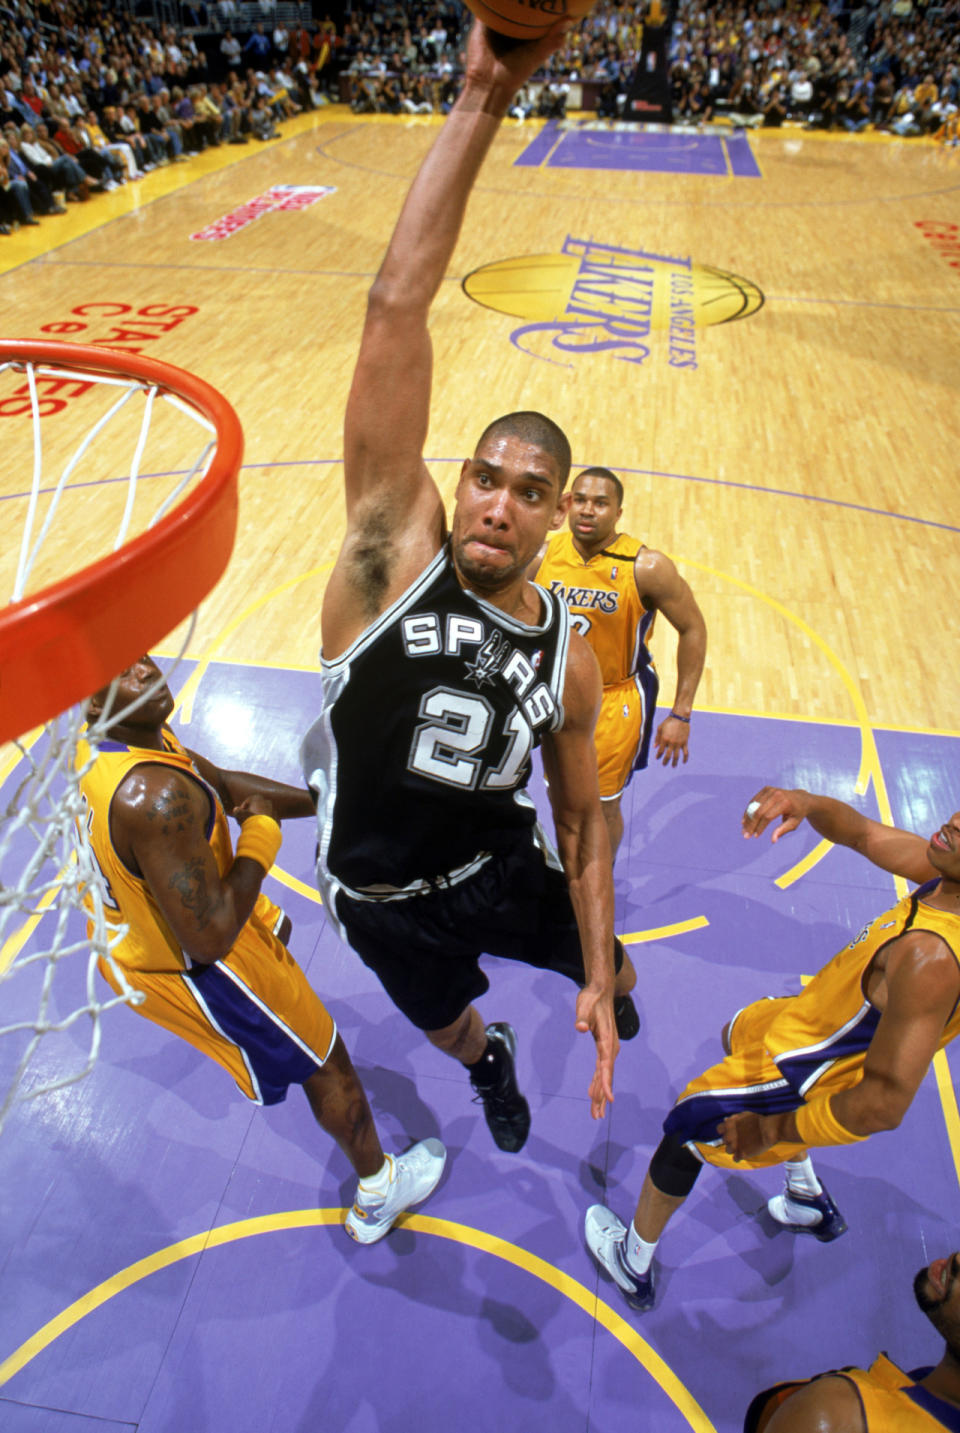 <p>2003: Tim Duncan #21 of the San Antonio Spurs goes up to dunk against the Los Angeles Lakers in Game Three of the Western Conference Semifinals during the 2003 NBA Playoffs at Staples Center on May 9, 2003 in Los Angeles, California. <br></p>